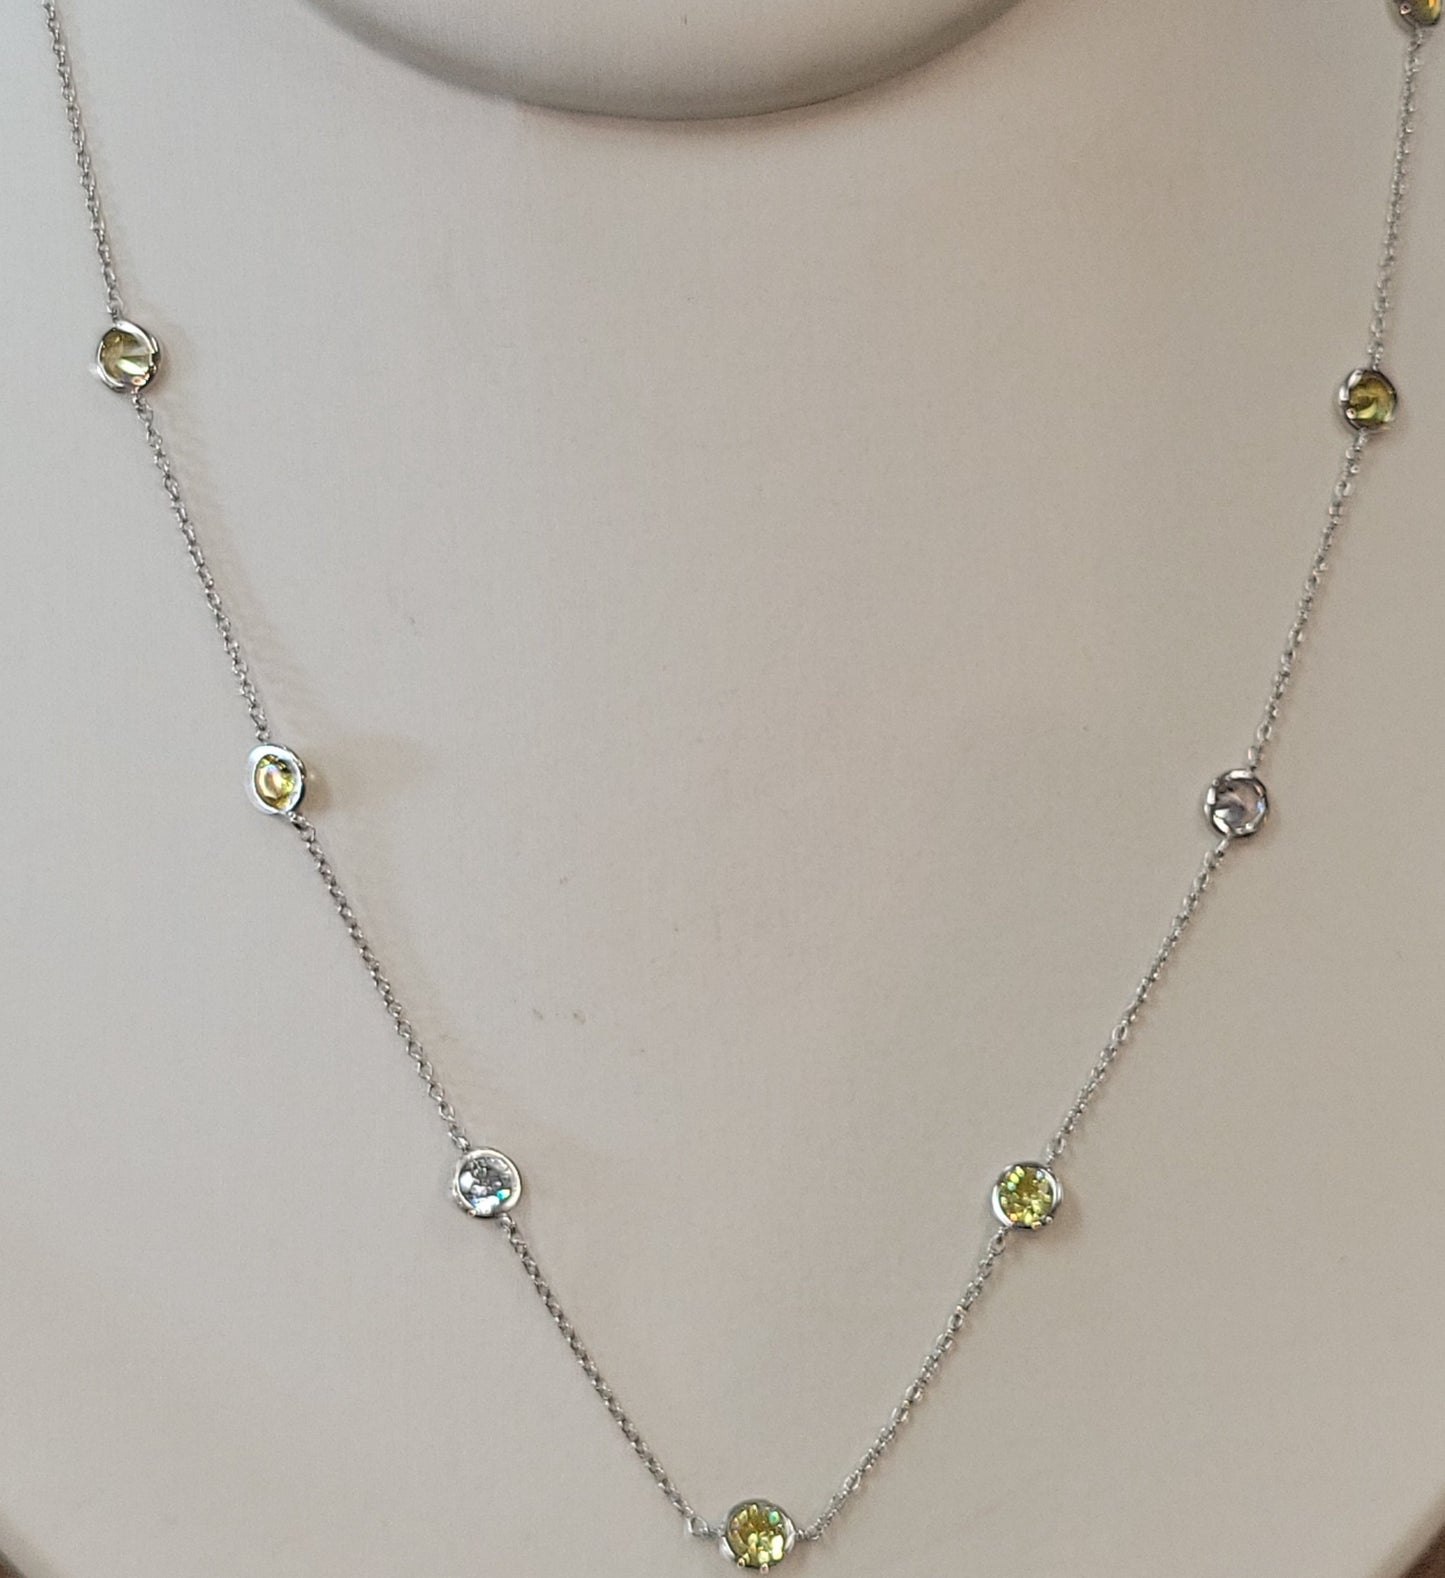 18K Platinum Over Sterling 1.25 ct Yellow/White Flawless Cz. Necklace